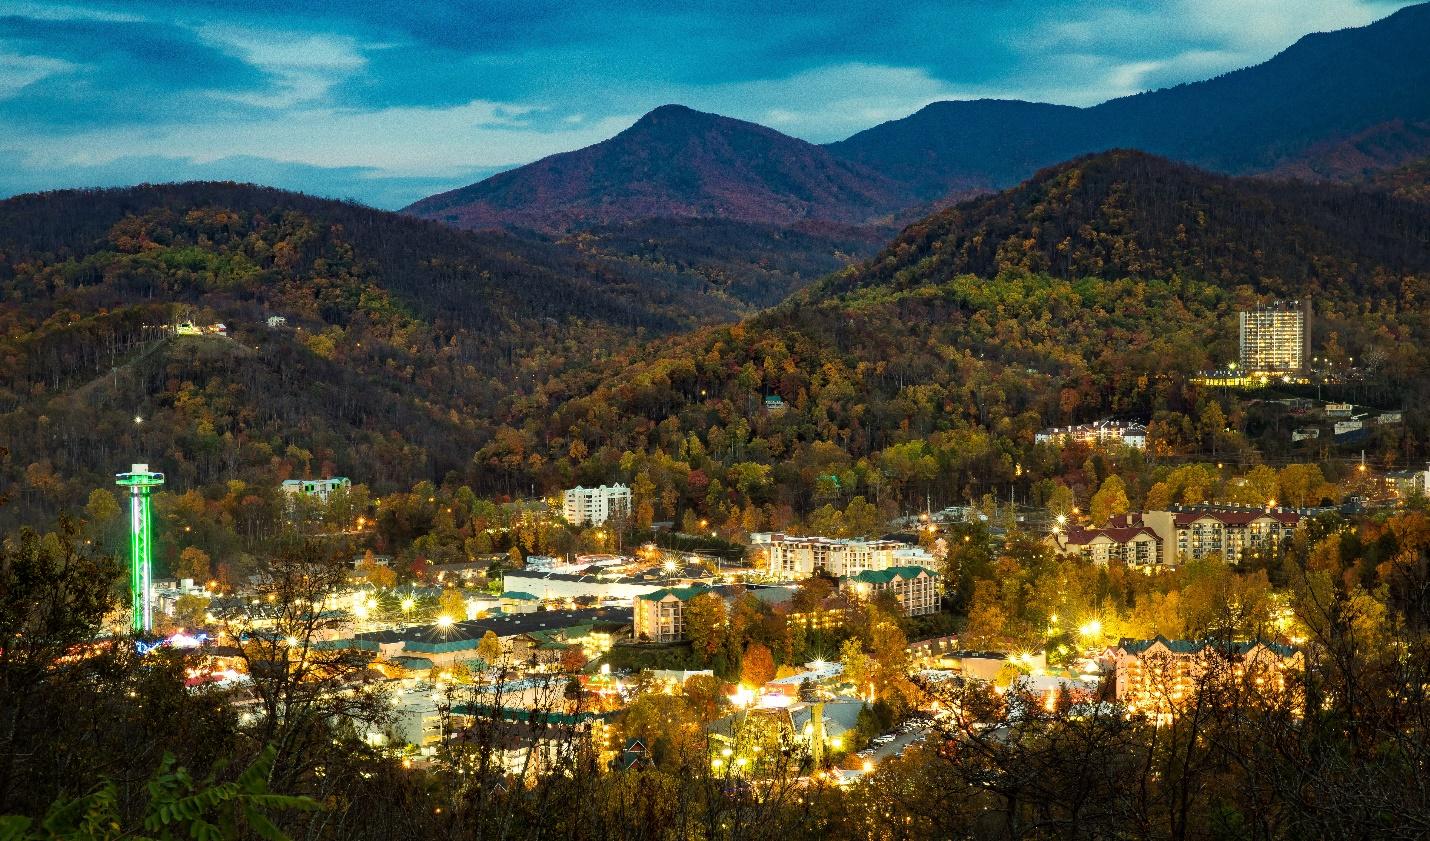 Family Fun in Gatlinburg: 8 Activities for All Ages